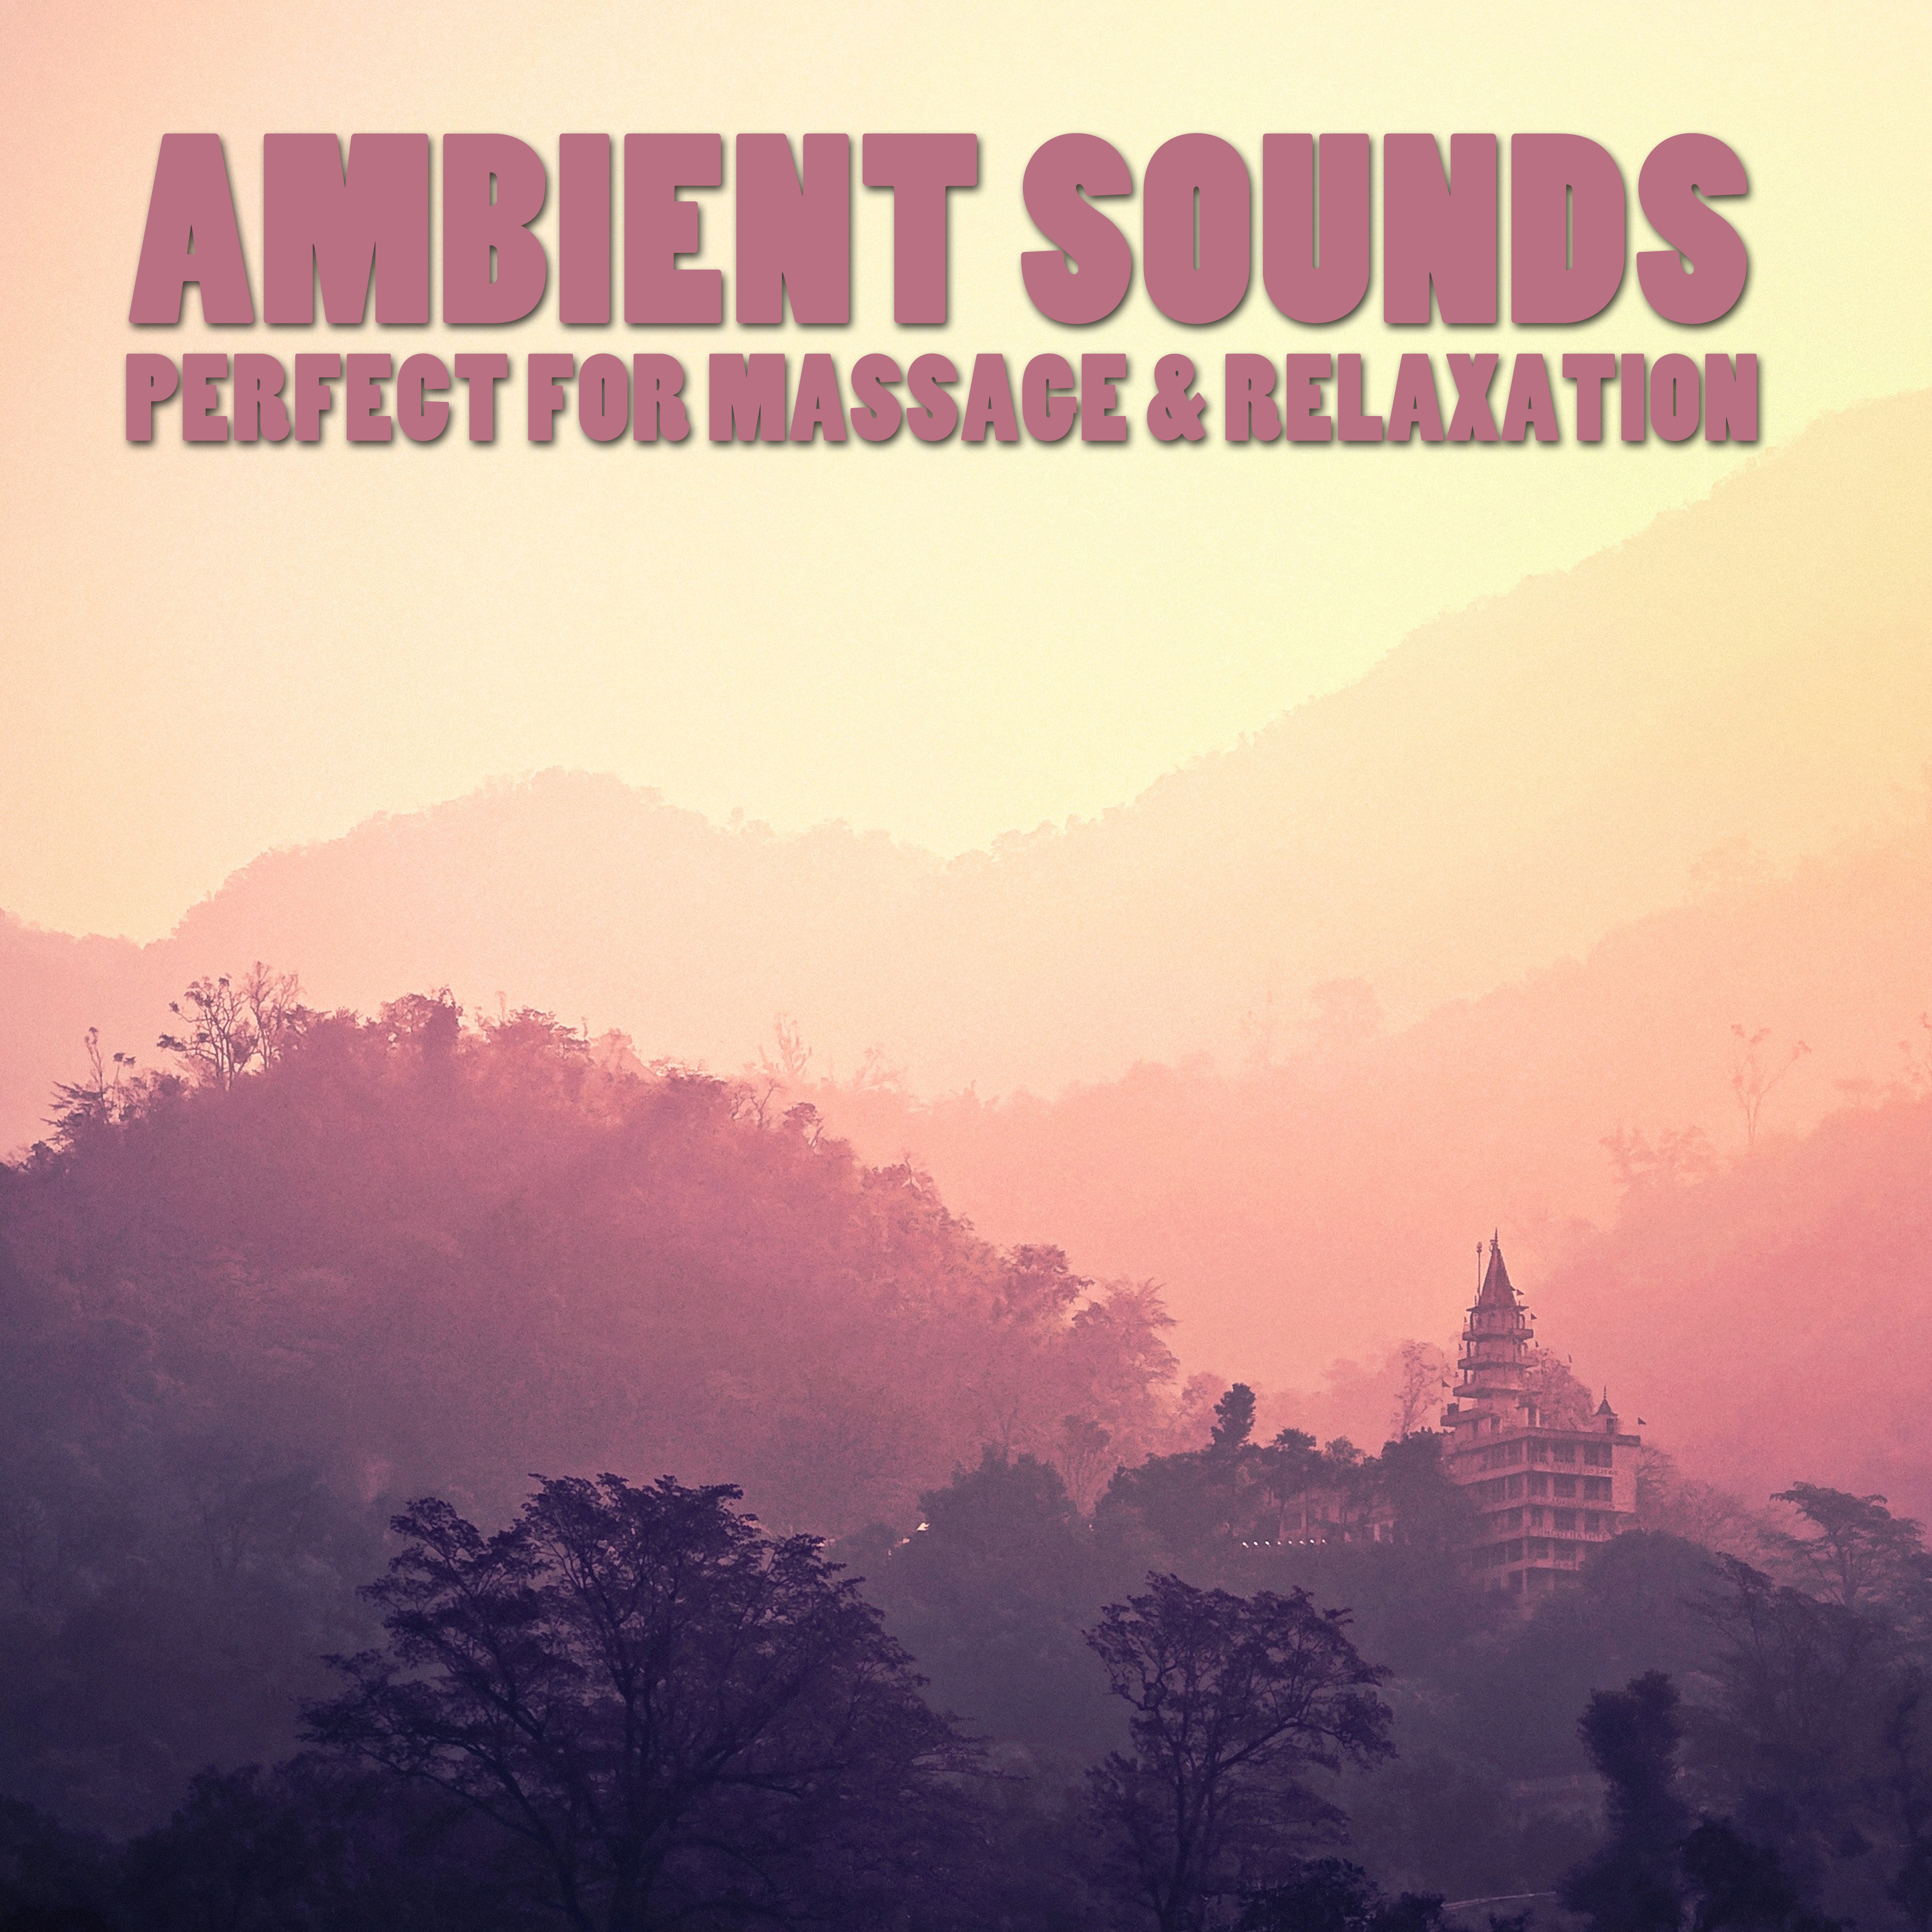 12 Ambient Sounds: Perfect for Massage & Relaxation